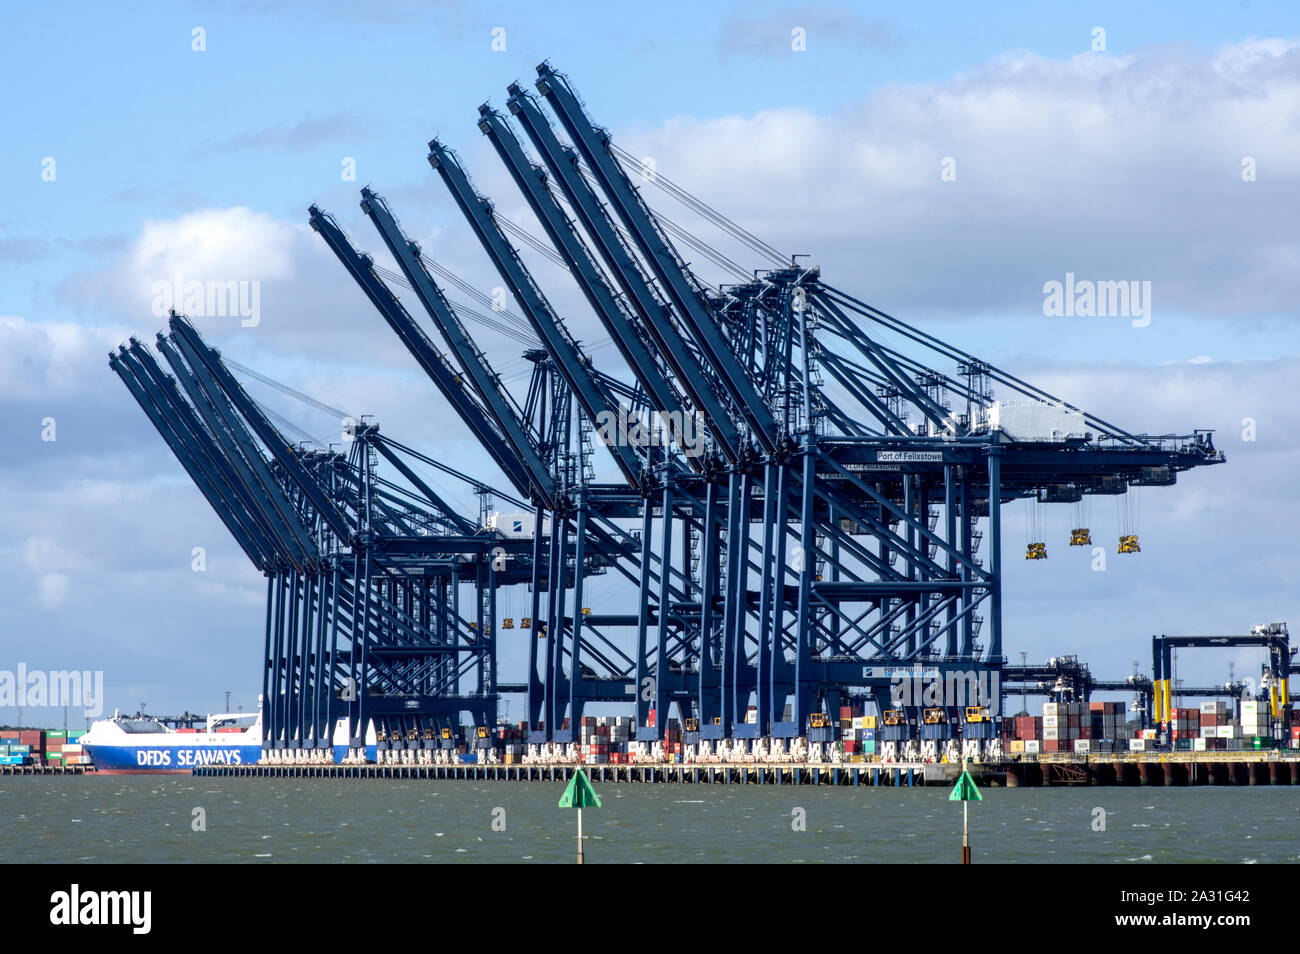 Container gantry cranes lined up readt to load ships Stock Photo